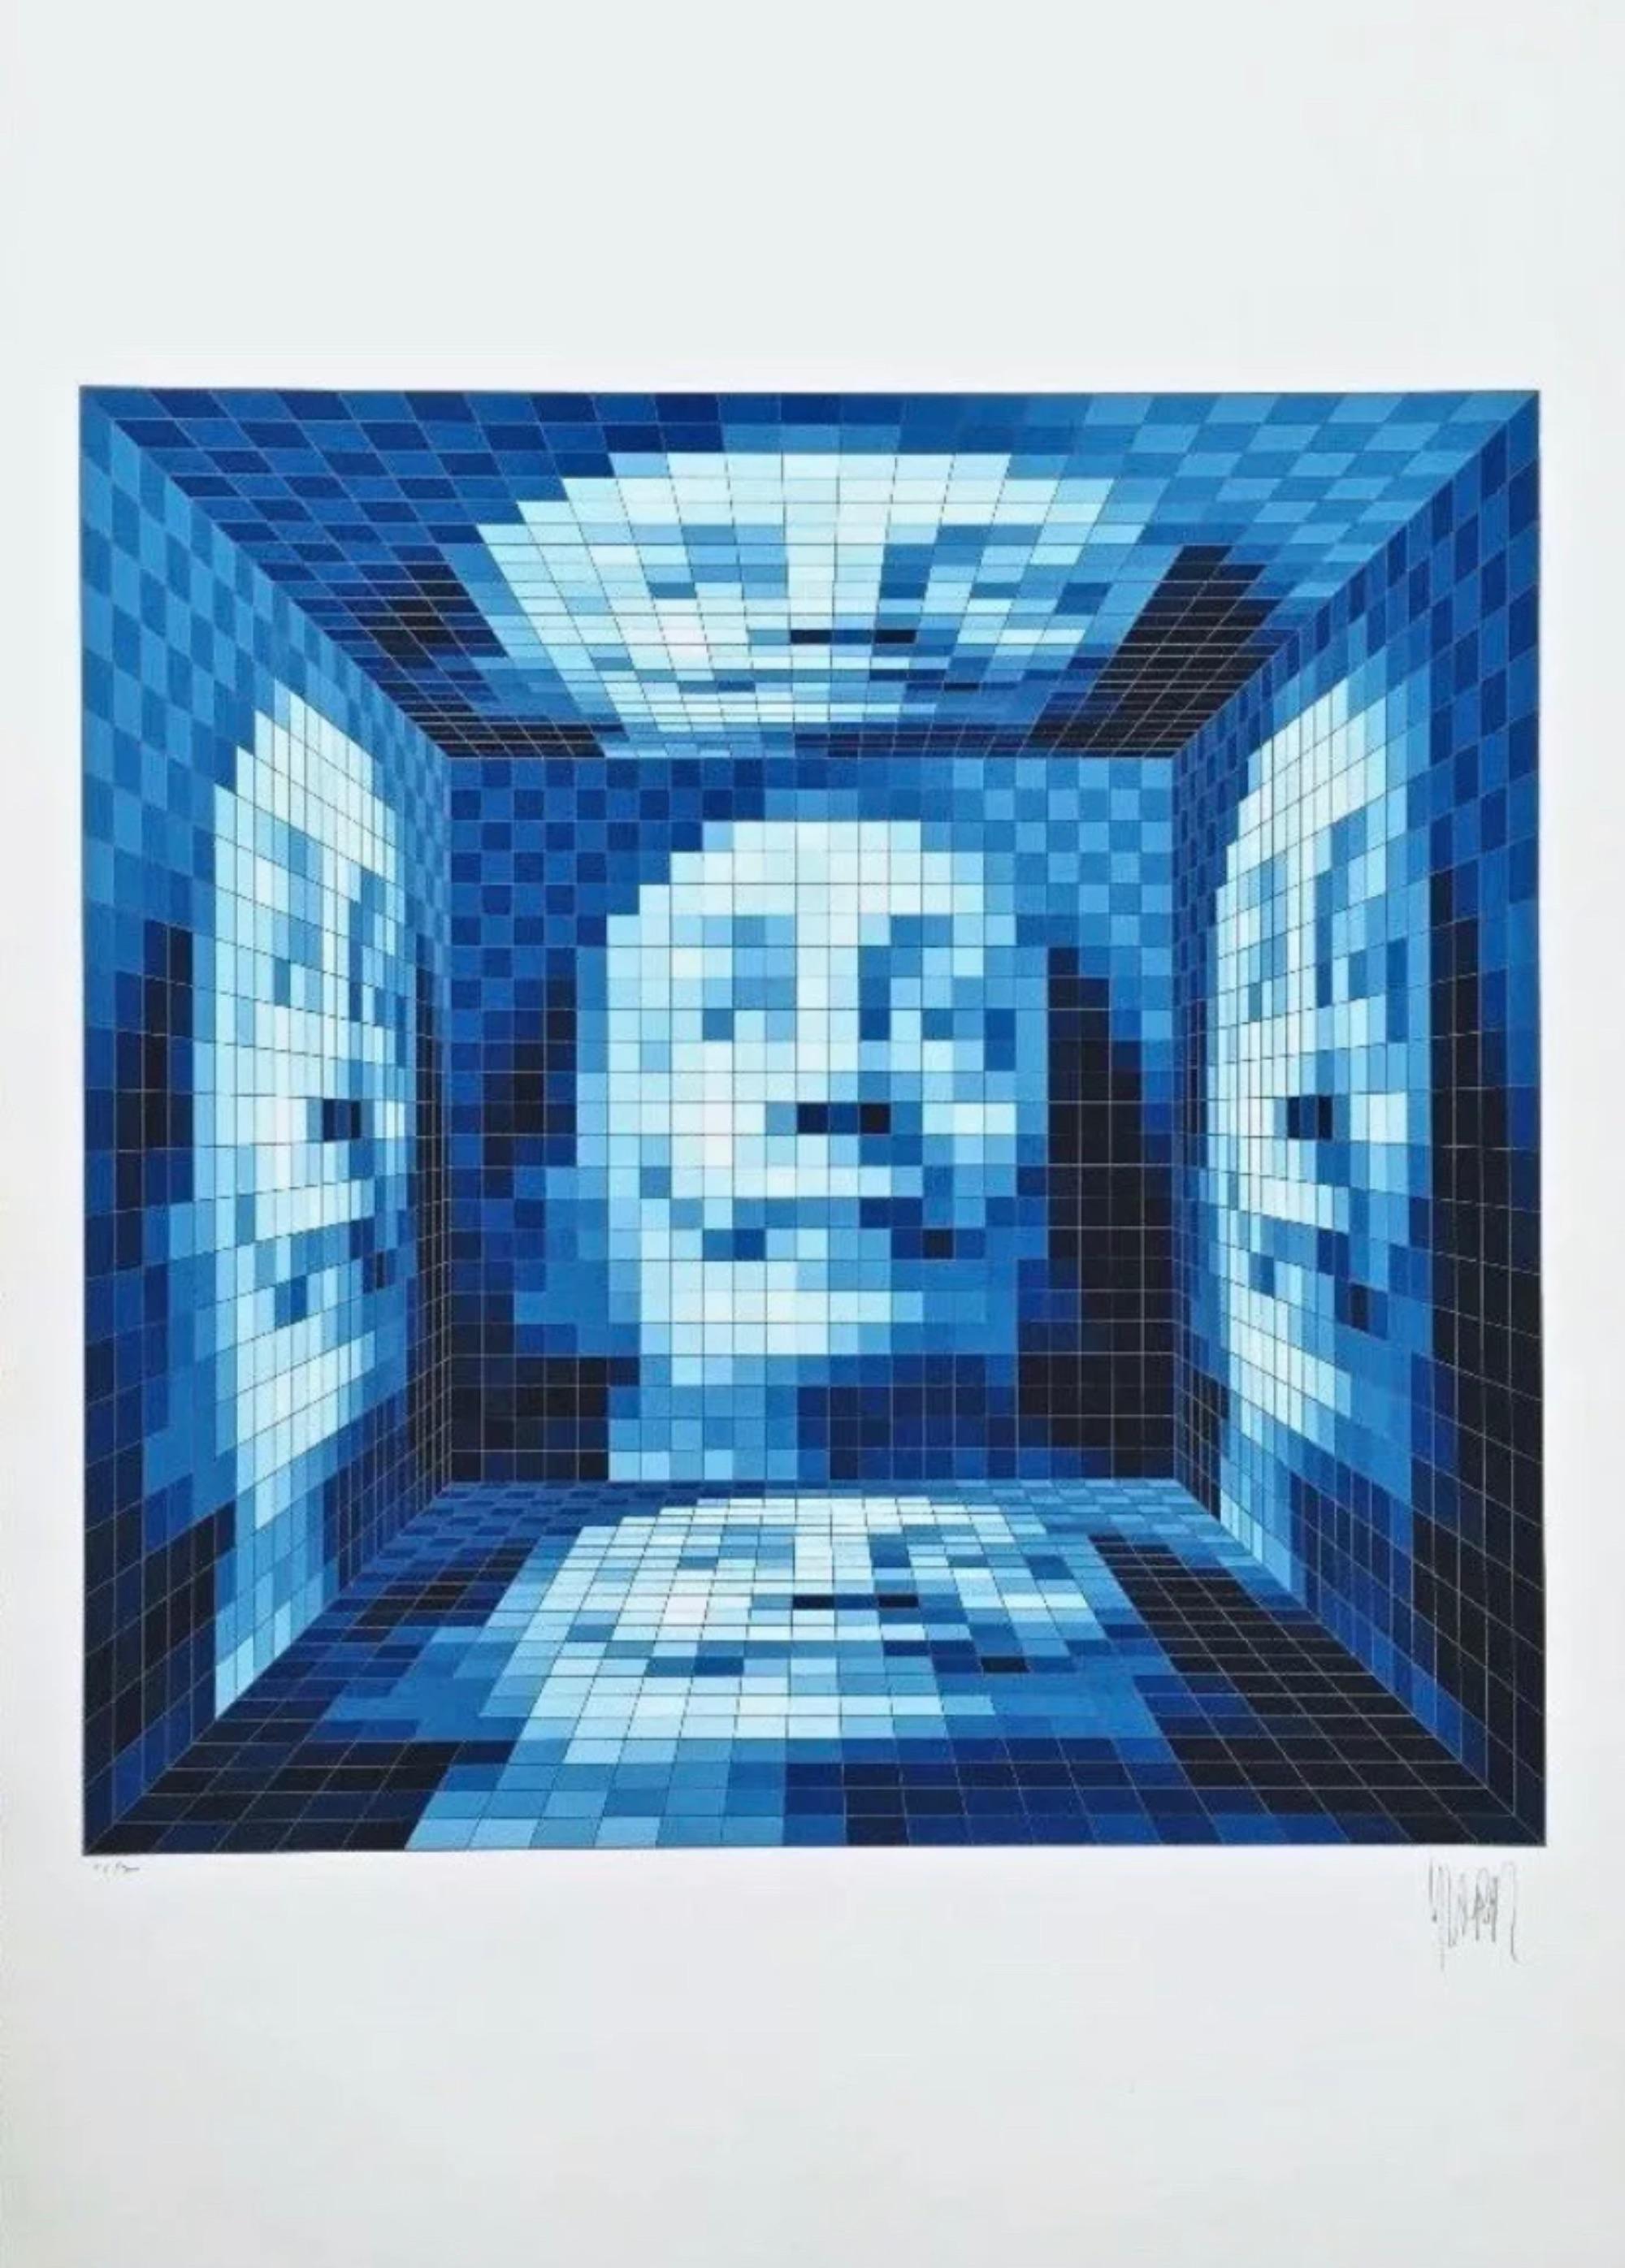 Five Faces of Dali #5, Yvaral - Print by Yvaral (Jean-Pierre Vasarely)